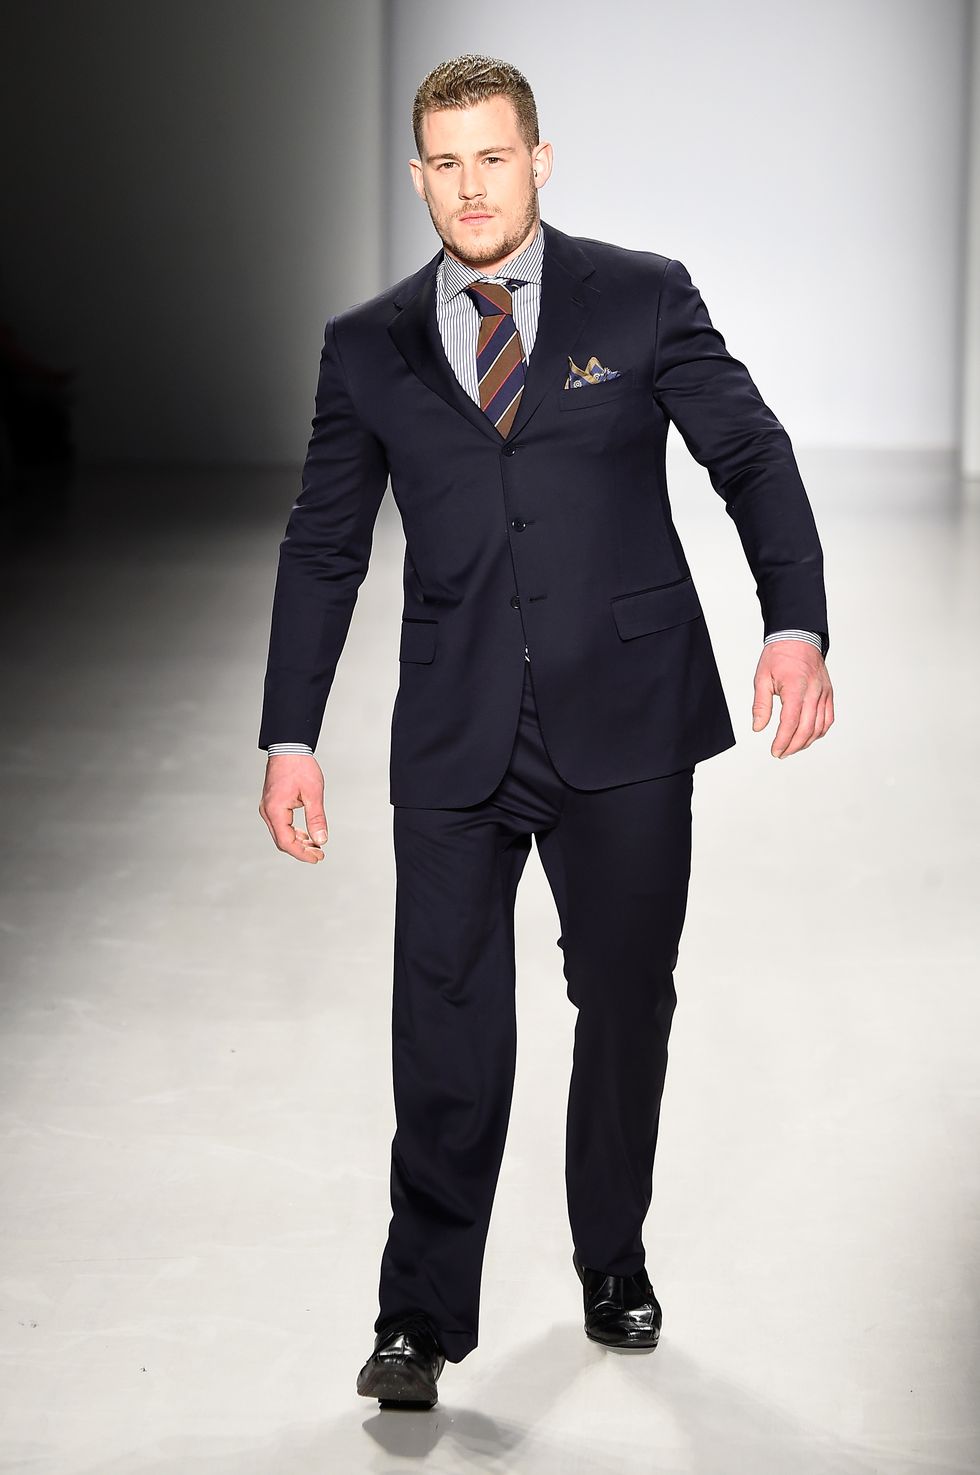 Jack Eyers becomes first male model amputee to walk at New York Fashion Week